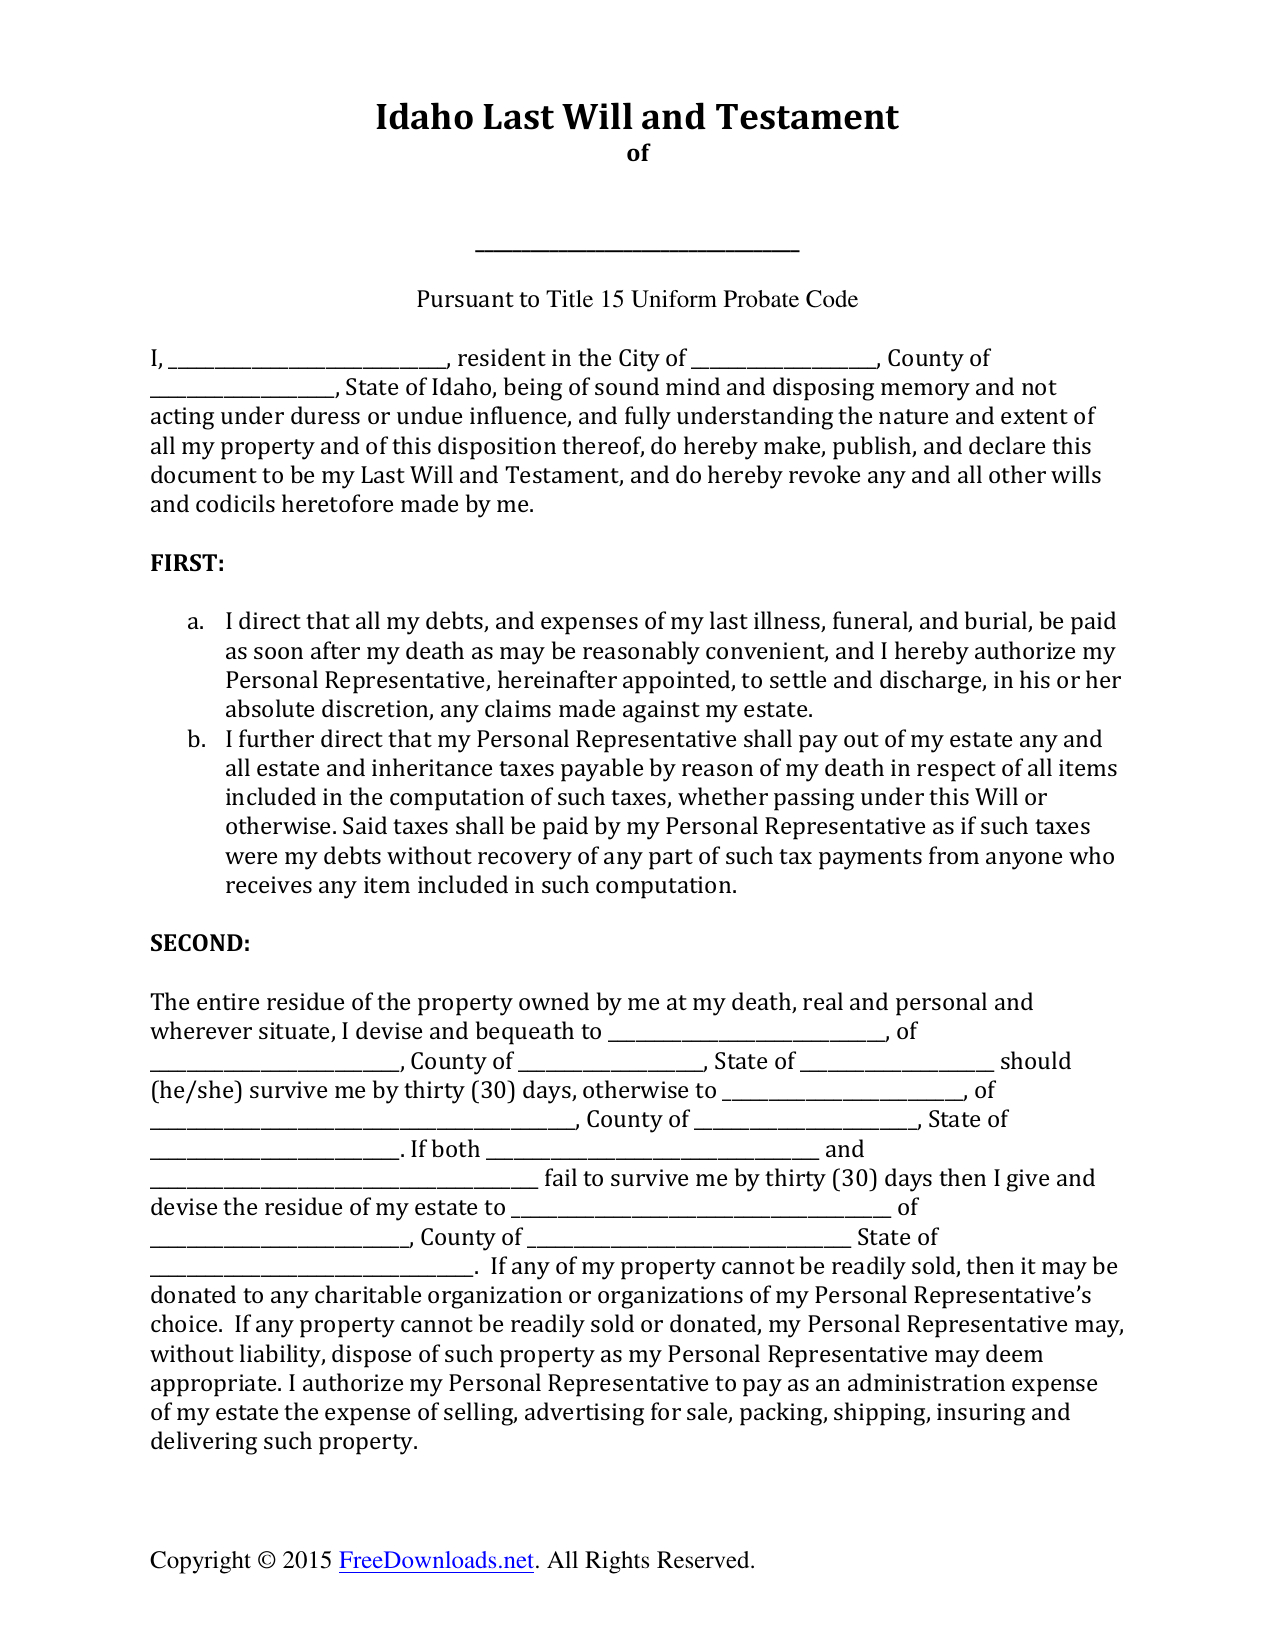 Printable Idaho Last Will And Testament Forms Free - 8.11 - Free Printable Will Forms